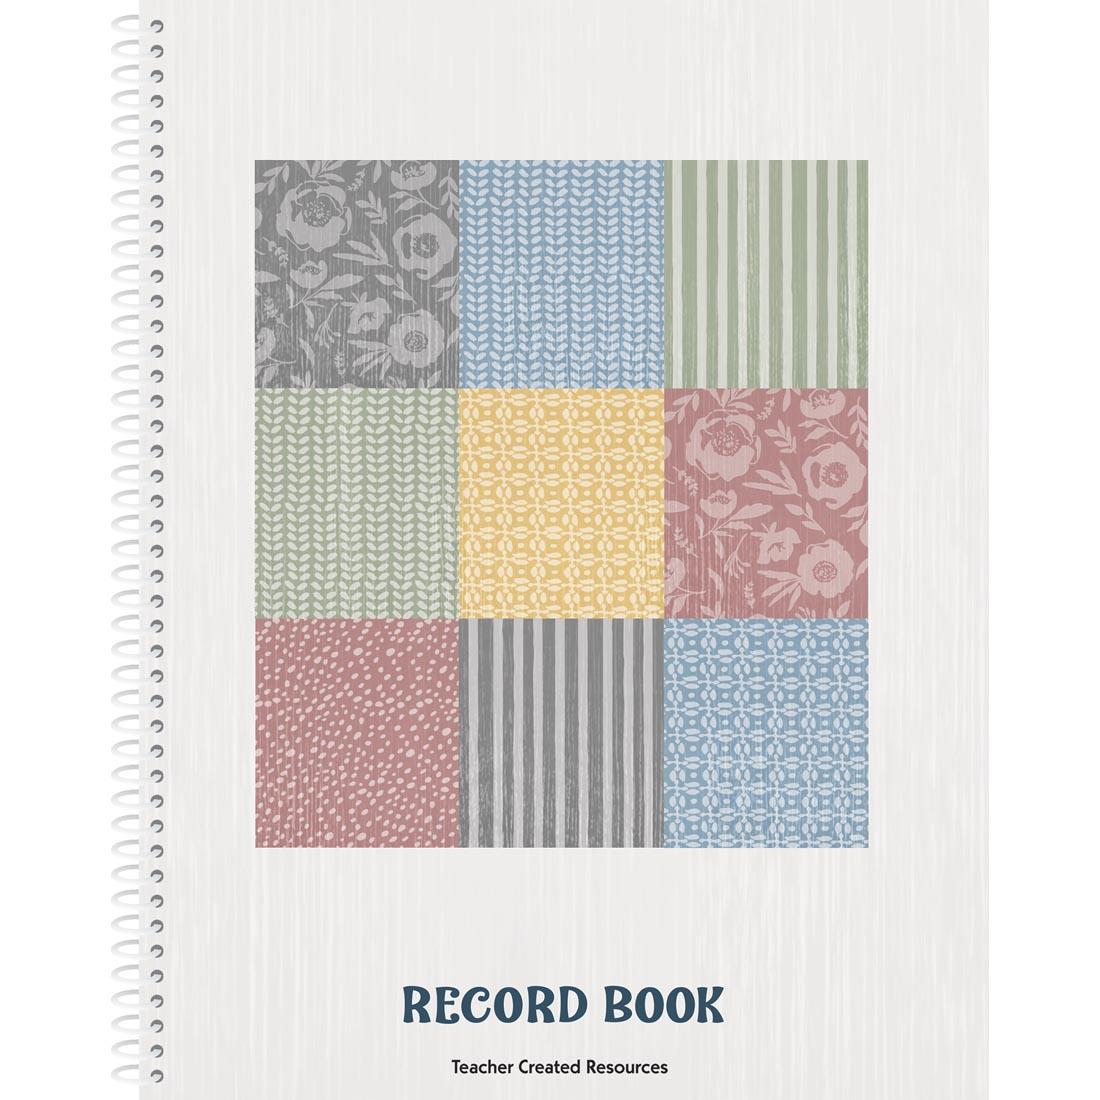 front cover of the Record Book from the Classroom Cottage collection by Teacher Created Resources